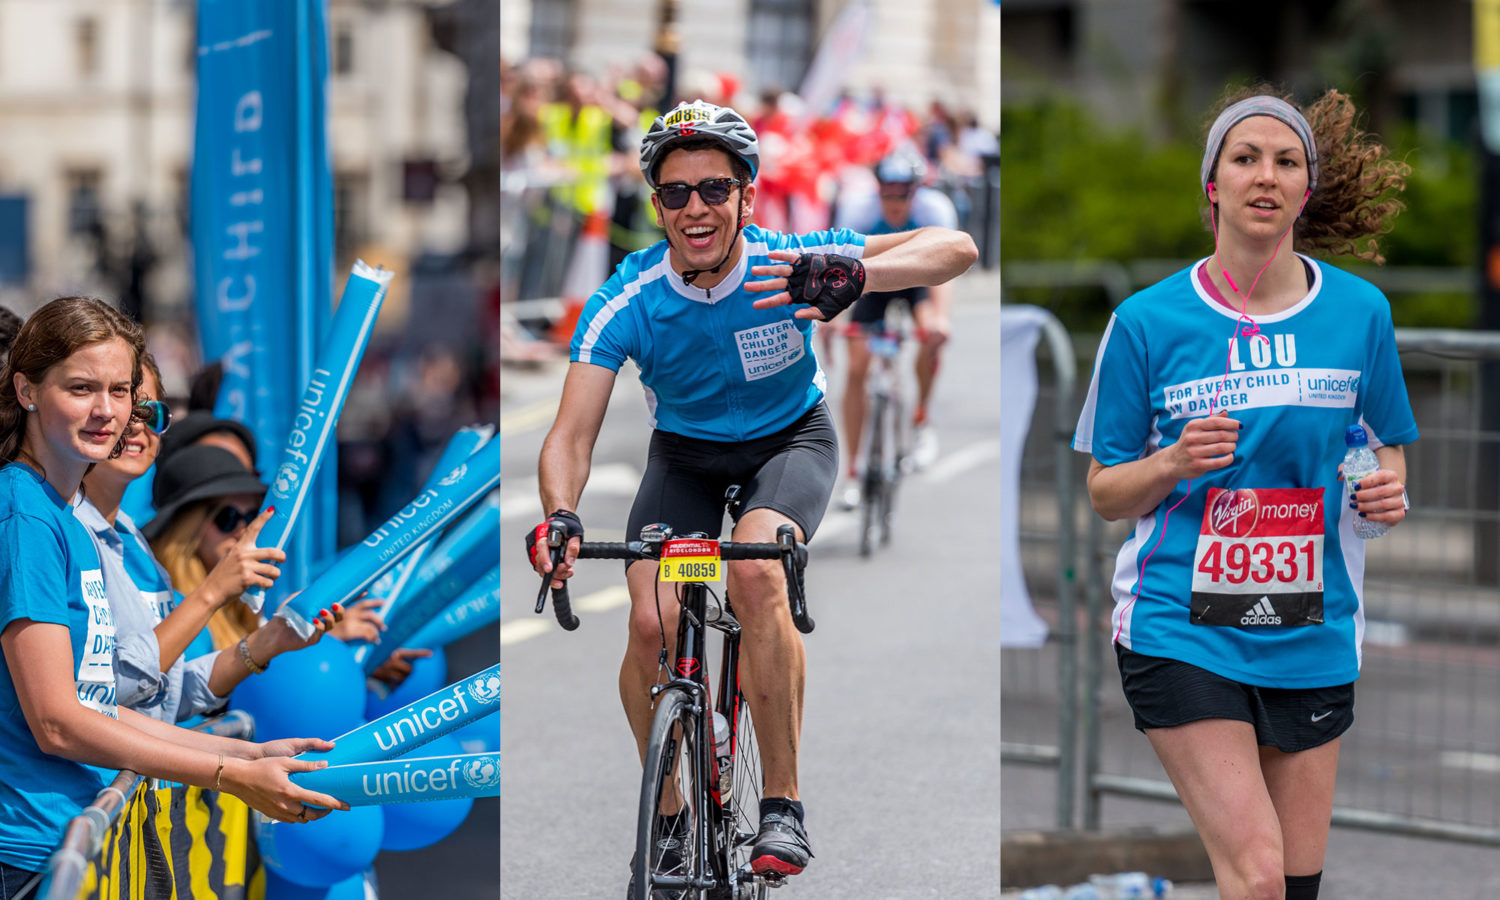 Run, cycle, swim or skydive for Team Unicef. Choose a charity challenge event and raise money to keep children safe.